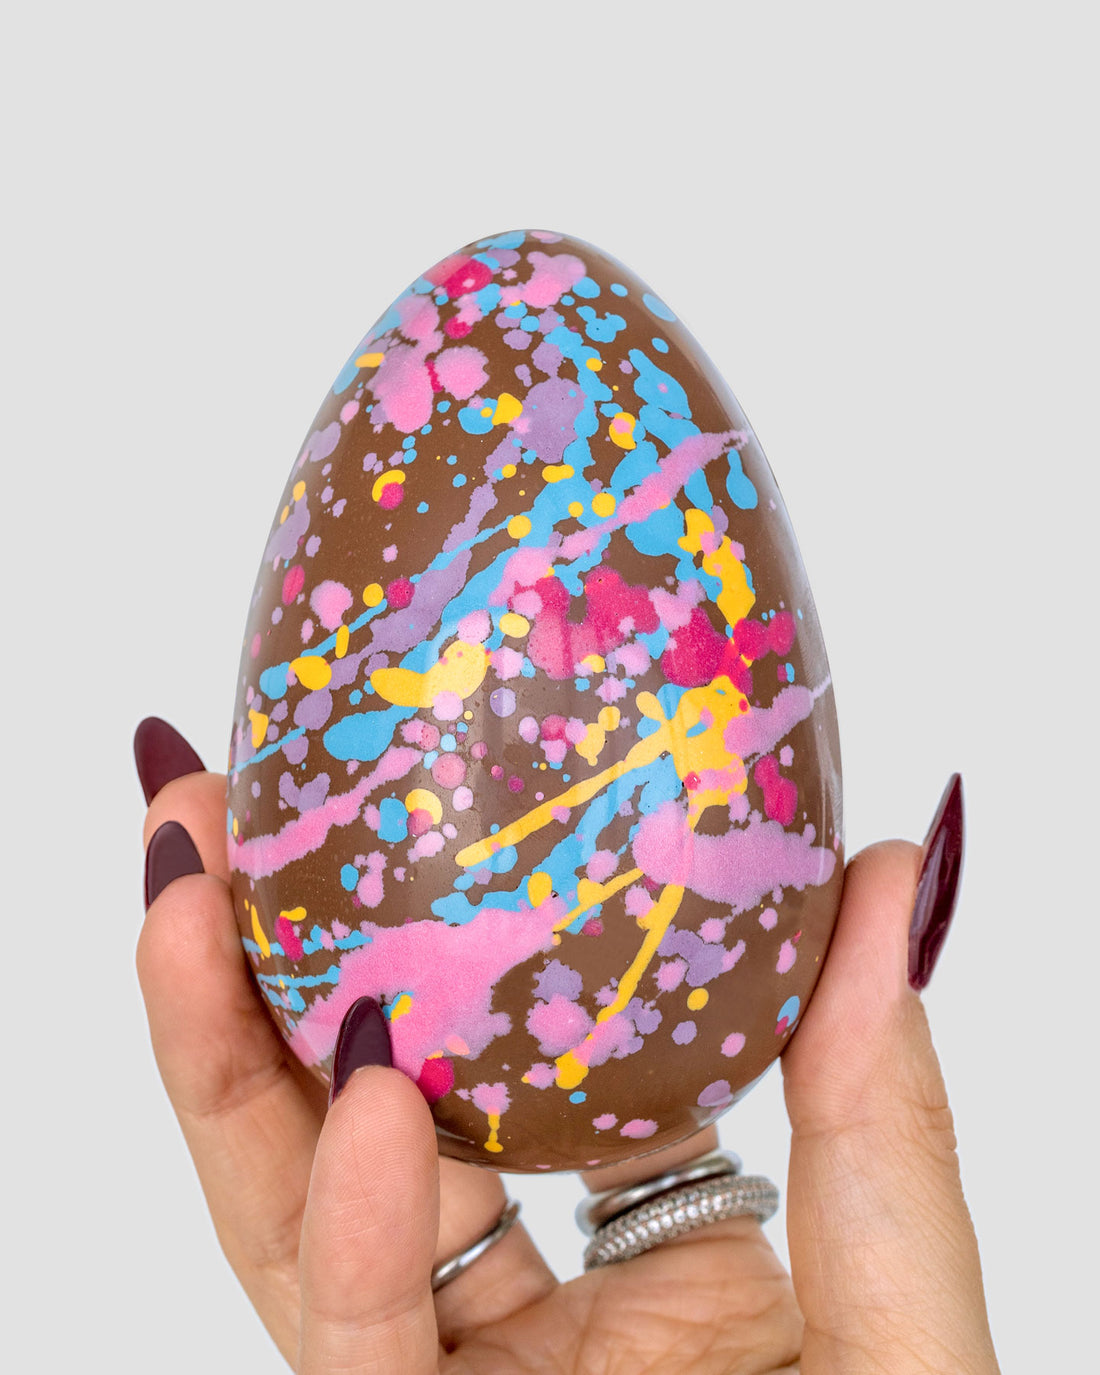 Treat-Filled Chocolate Eggs